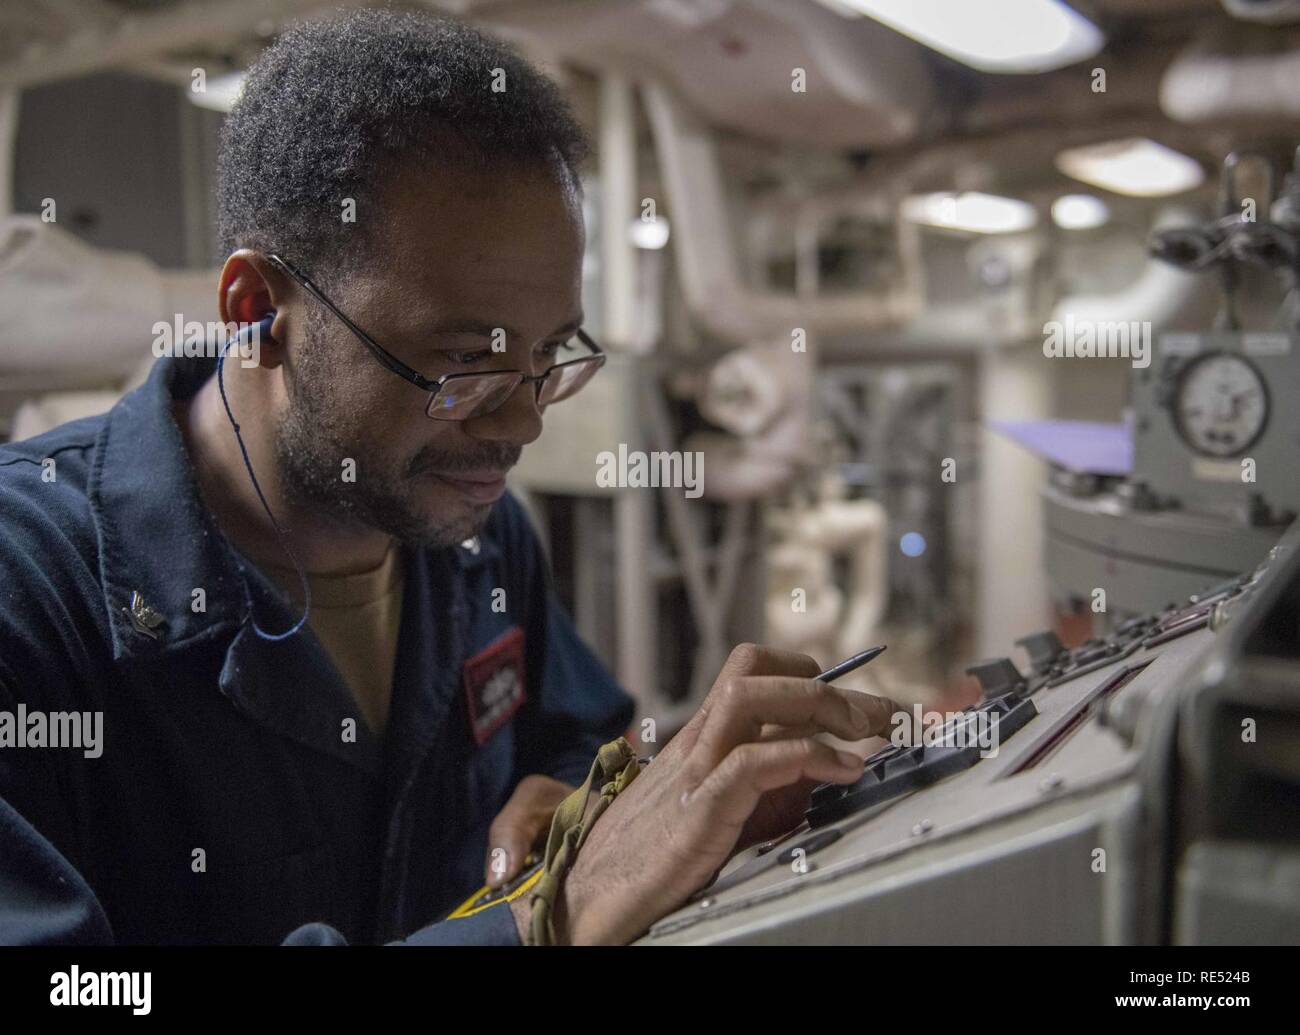 EAST CHINA SEA (Jan. 1, 2018) Gas Turbine System Technician (Mechanical) 3rd Class Jonathan Pate, from Eagan, Min., takes readings from a low pressure system aboard the Arleigh Burke-class guided-missile destroyer USS McCampbell (DDG 85). McCampbell is forward-deployed to the U.S. 7th Fleet area of operations in support of security and stability in the Indo-Pacific region. Stock Photo